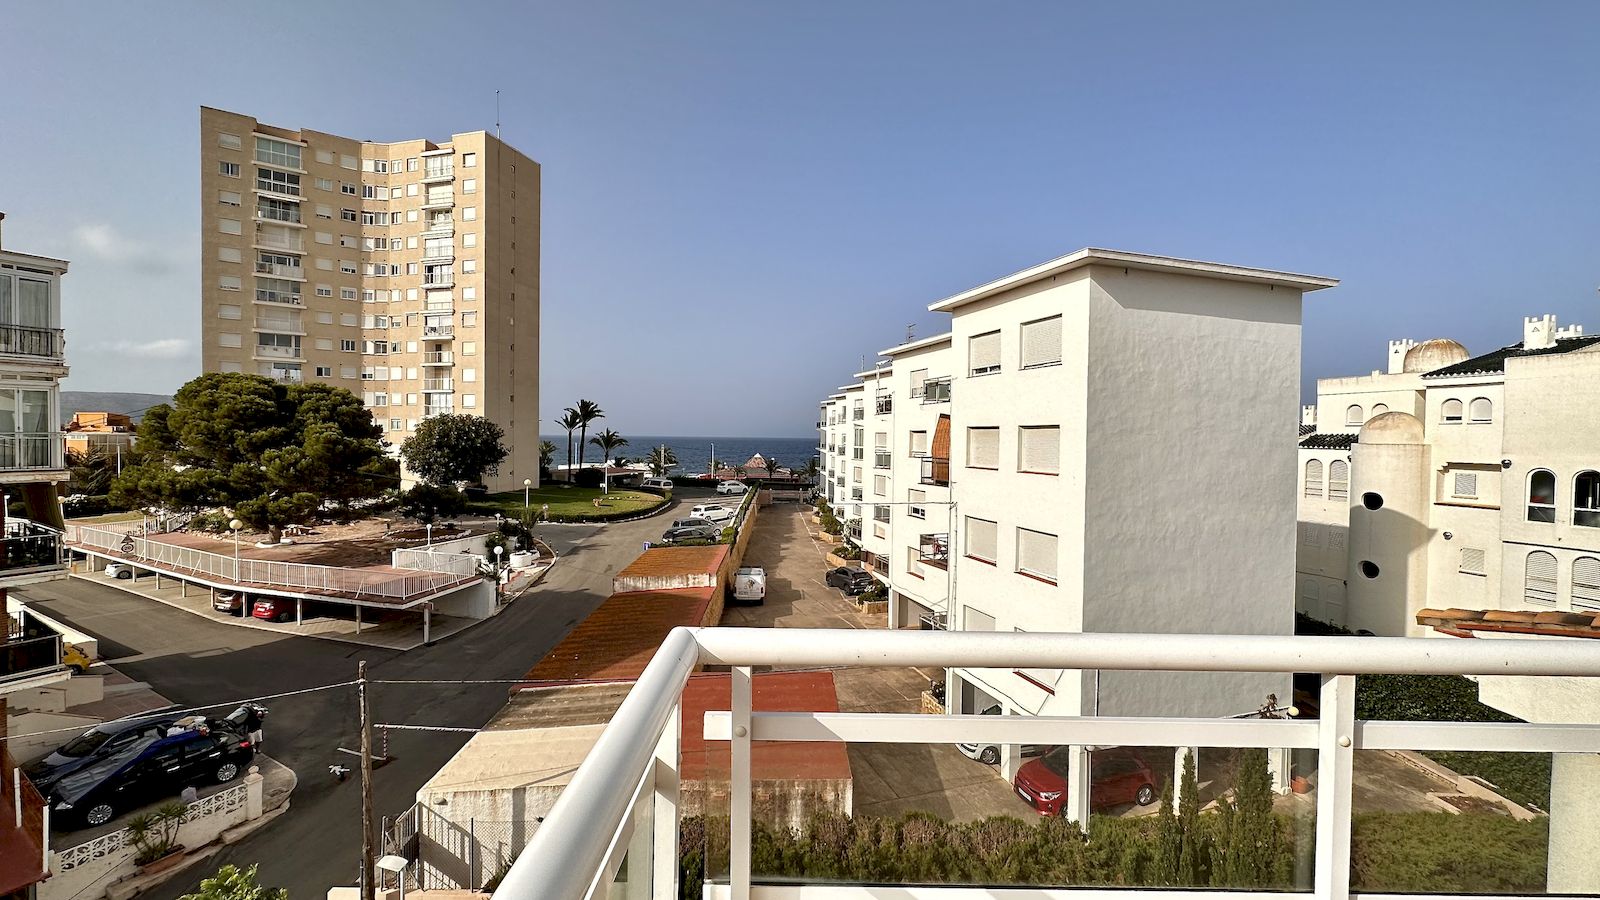 Duplex apartment for rent with sea view in Playa del Arenal - Javea